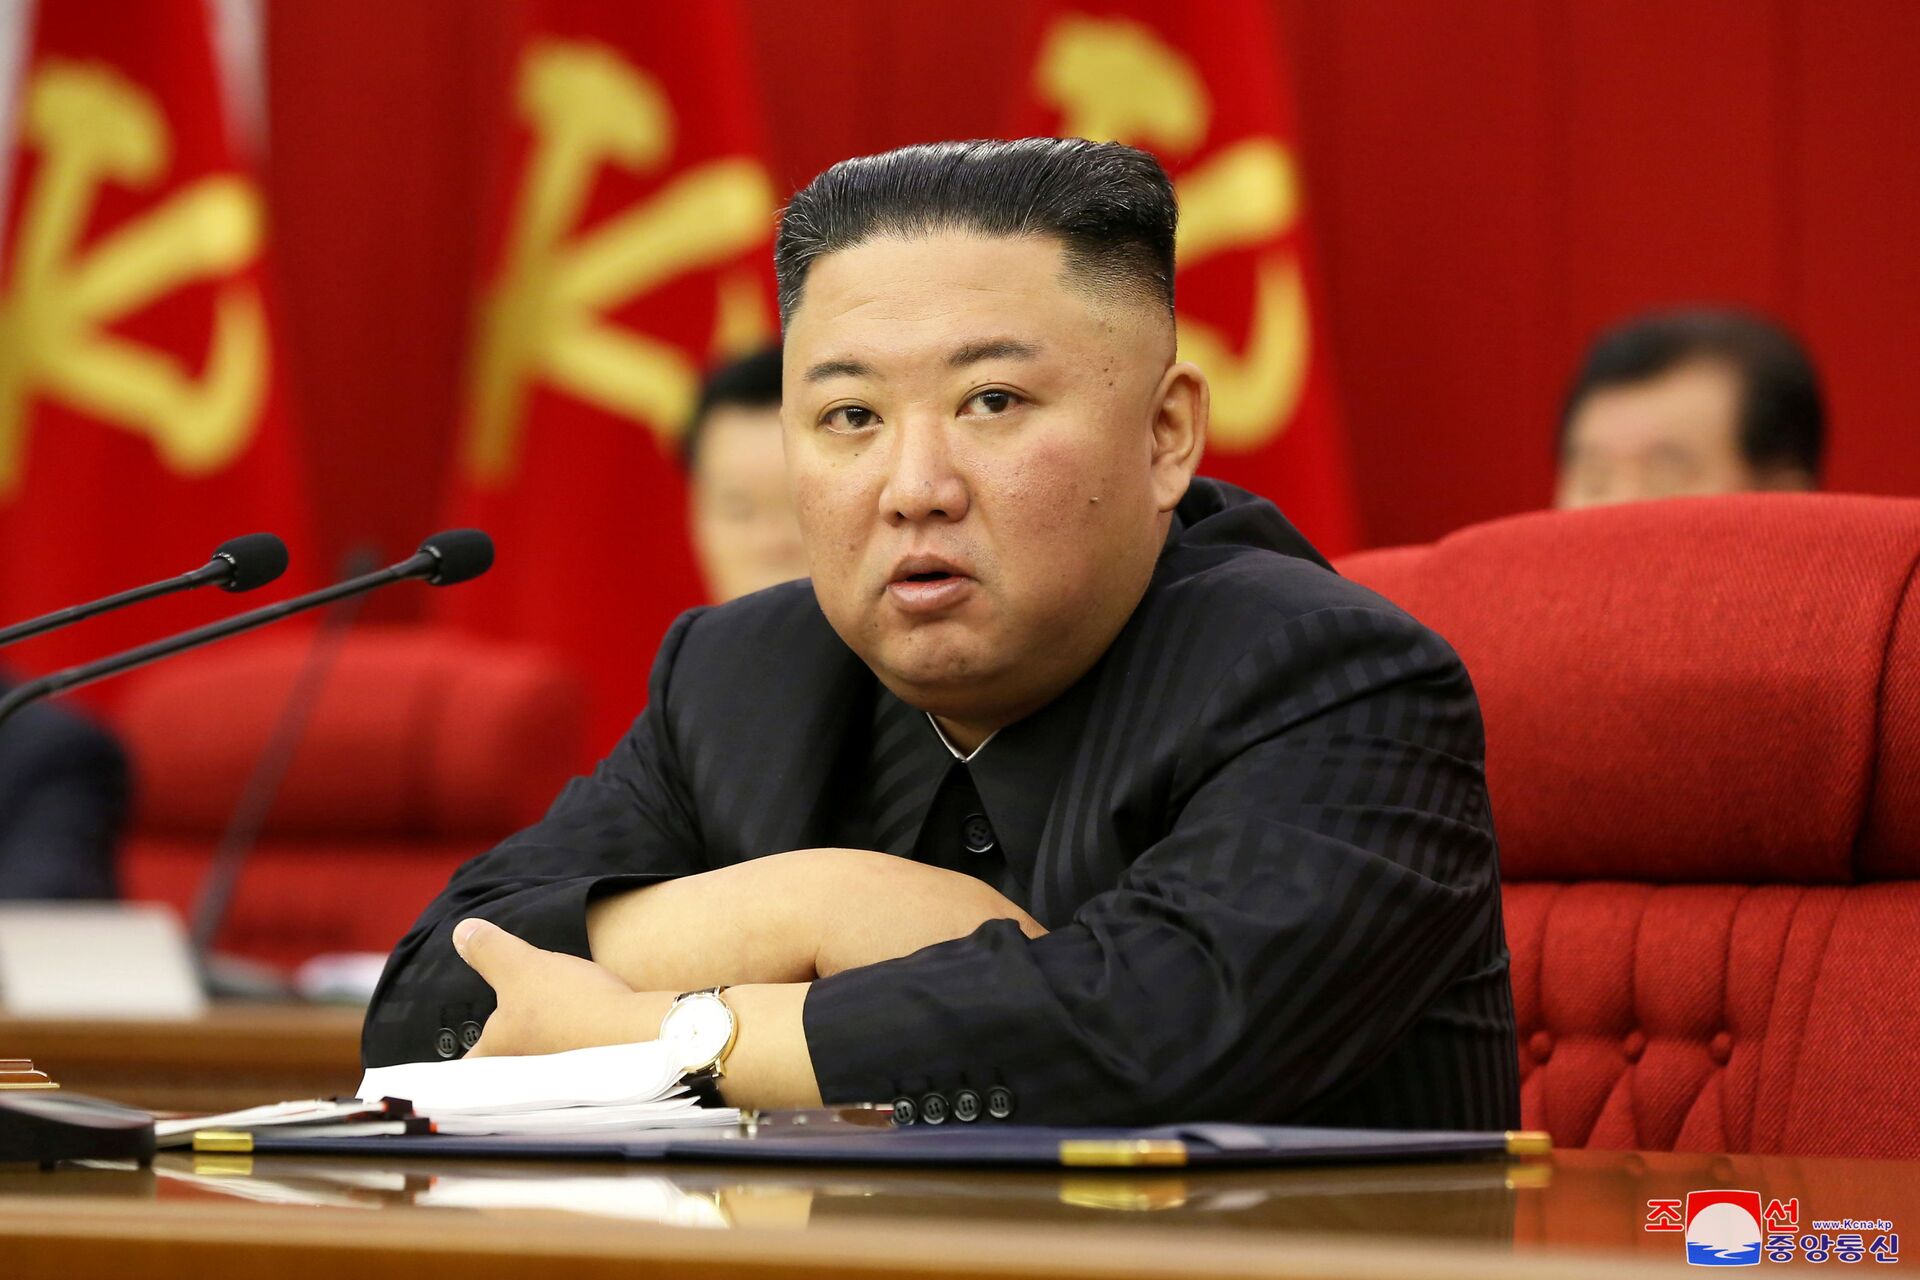 North Korean leader Kim Jong Un speaks at a meeting of the Workers' Party of Korea in Pyongyang, North Korea in this image released June 18, 2021 by the country's Korean Central News Agency. - Sputnik International, 1920, 07.09.2021